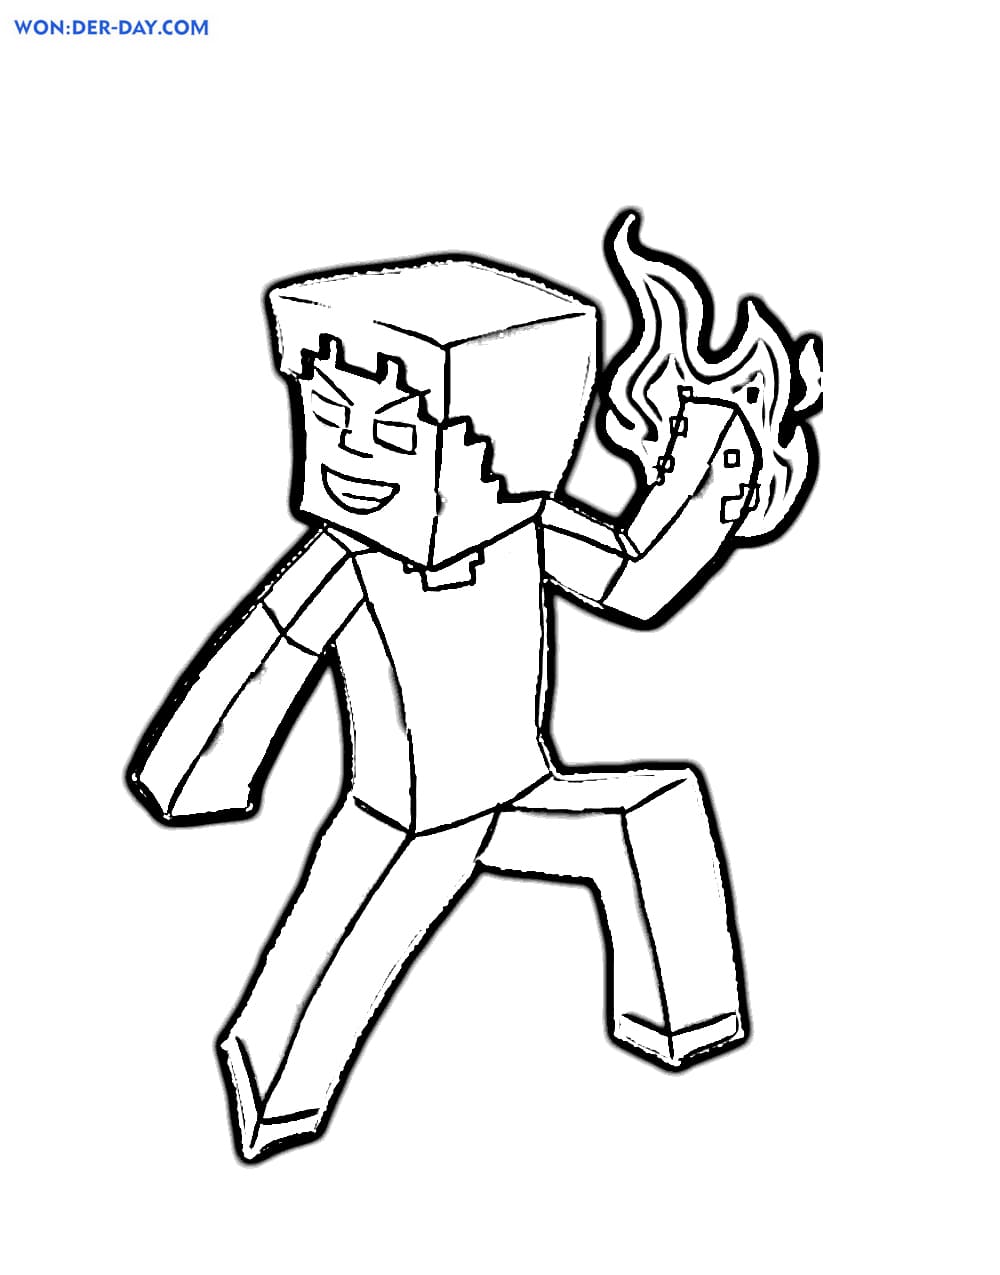 Herobrine Minecraft Coloring Pages Wonder Day Colorin - vrogue.co